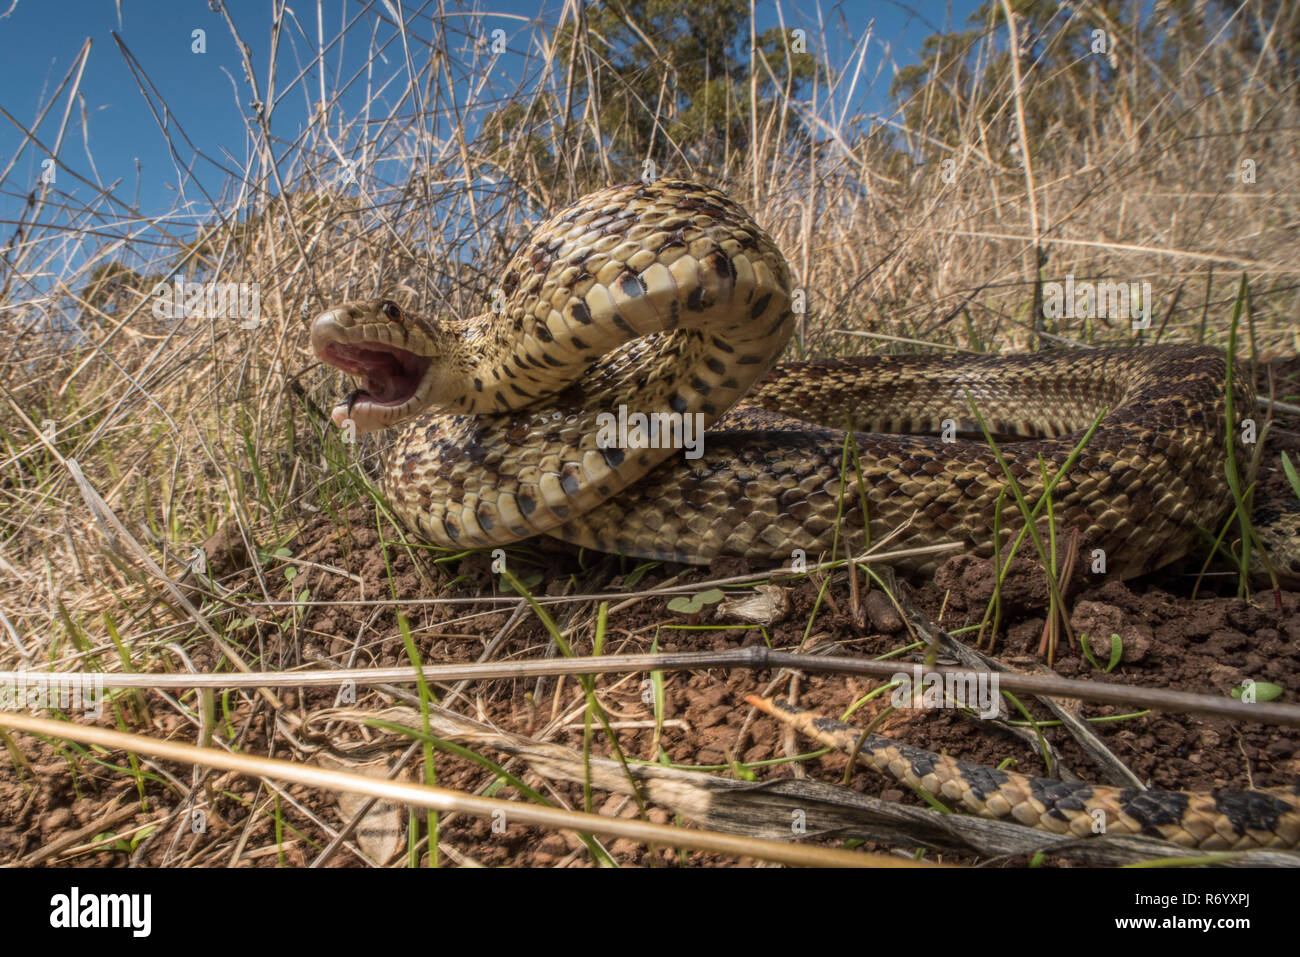 A extremely angry Pacific gopher snake (Pituophis catenifer catenifer) hissing and lunging at the camera in order to scare the photographer off. Stock Photo